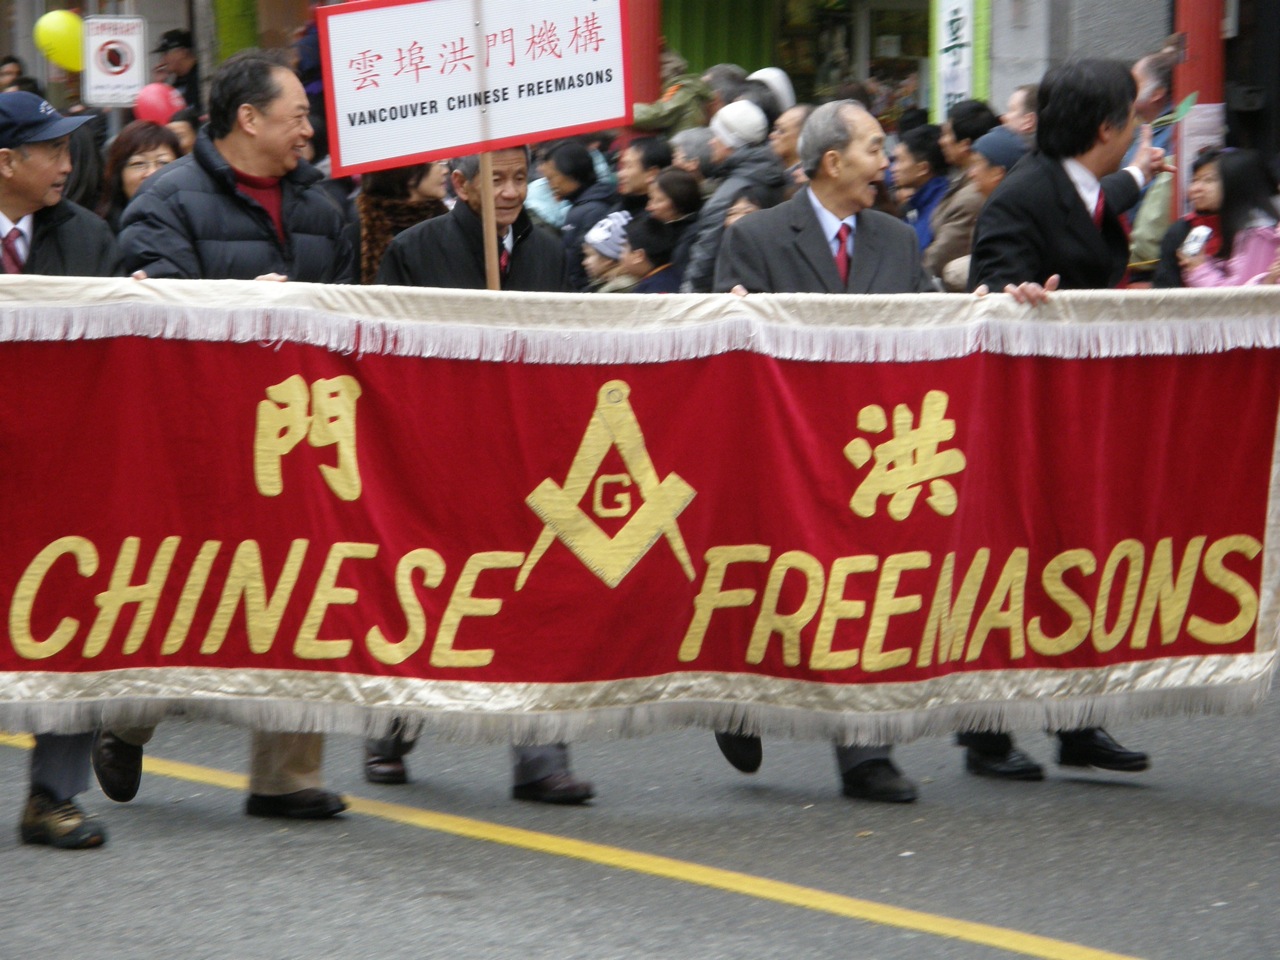 a group of people walking down a street carrying a banner